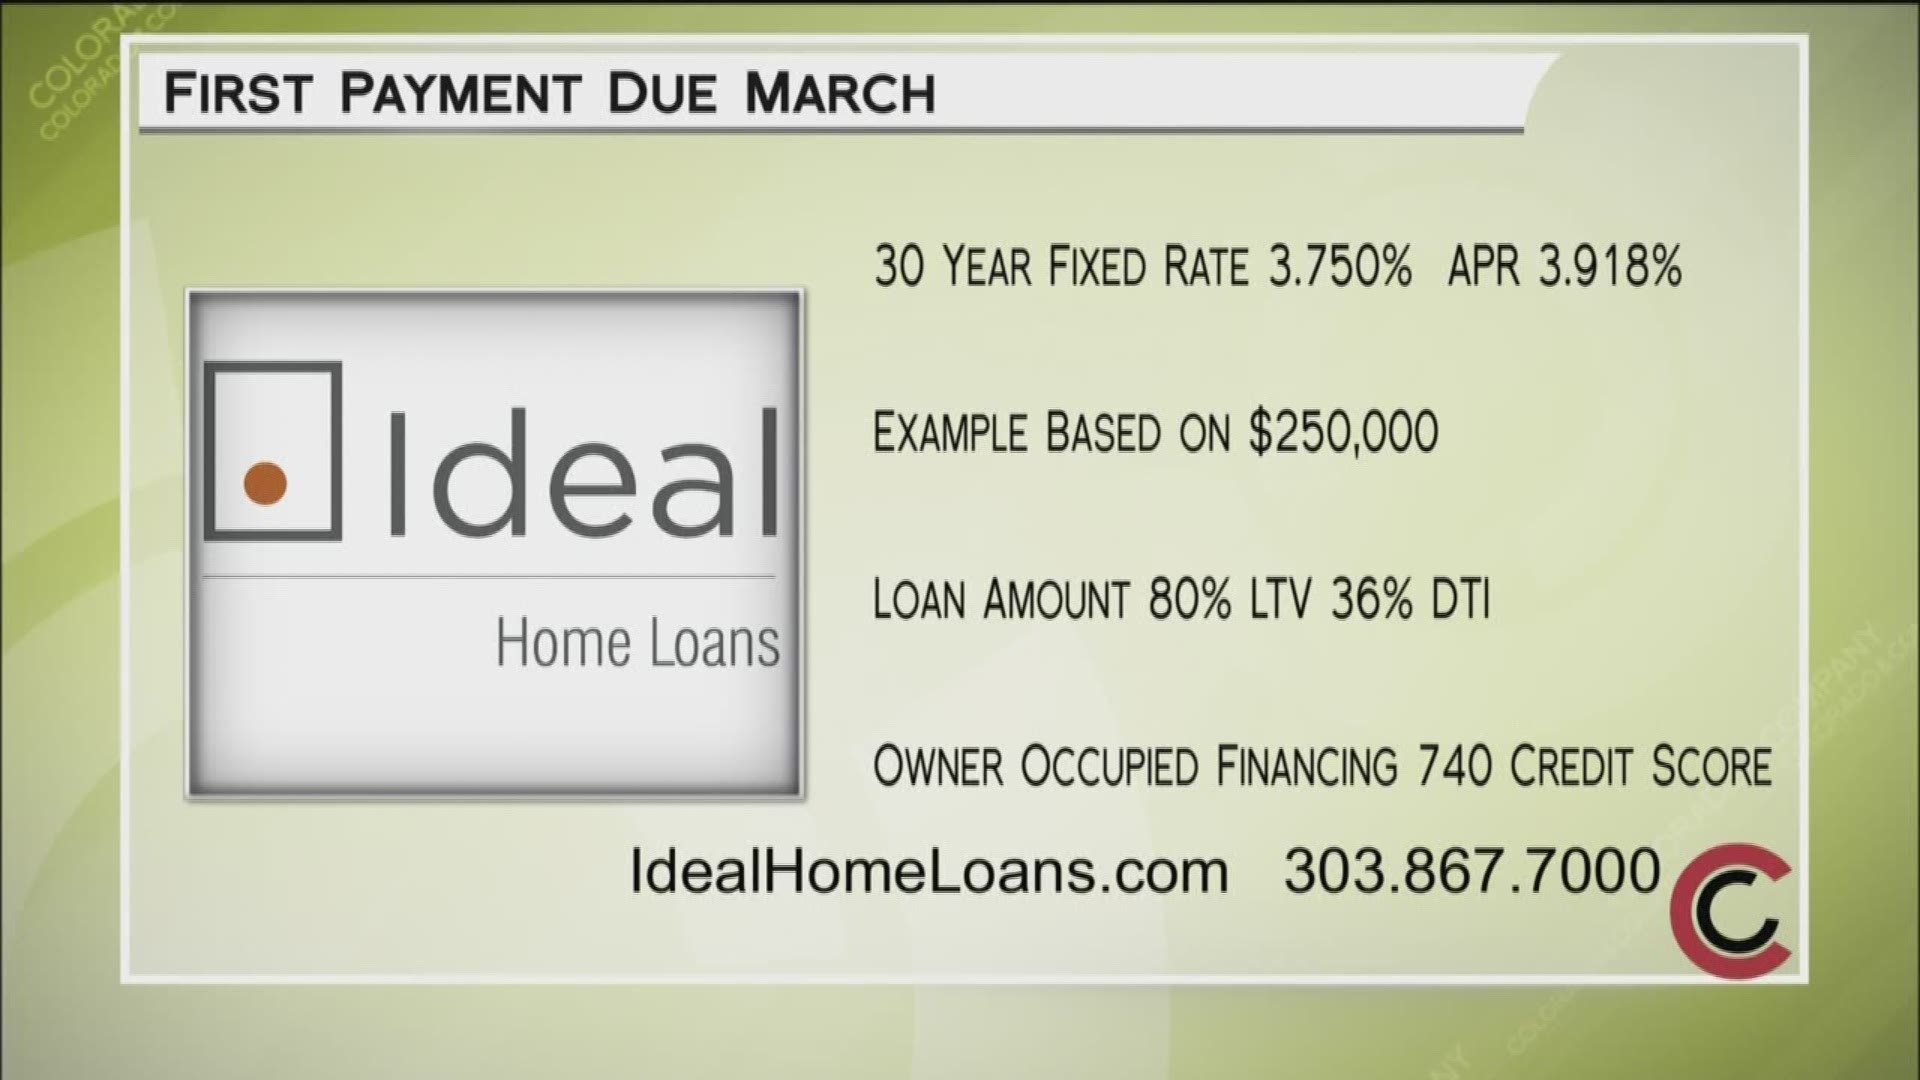 Call 303.867.7000 or apply online at IdealHomeLoans.com. Take advantage of Ideal Home Loans' free home mortgage consultation. First they listen, then they lend.